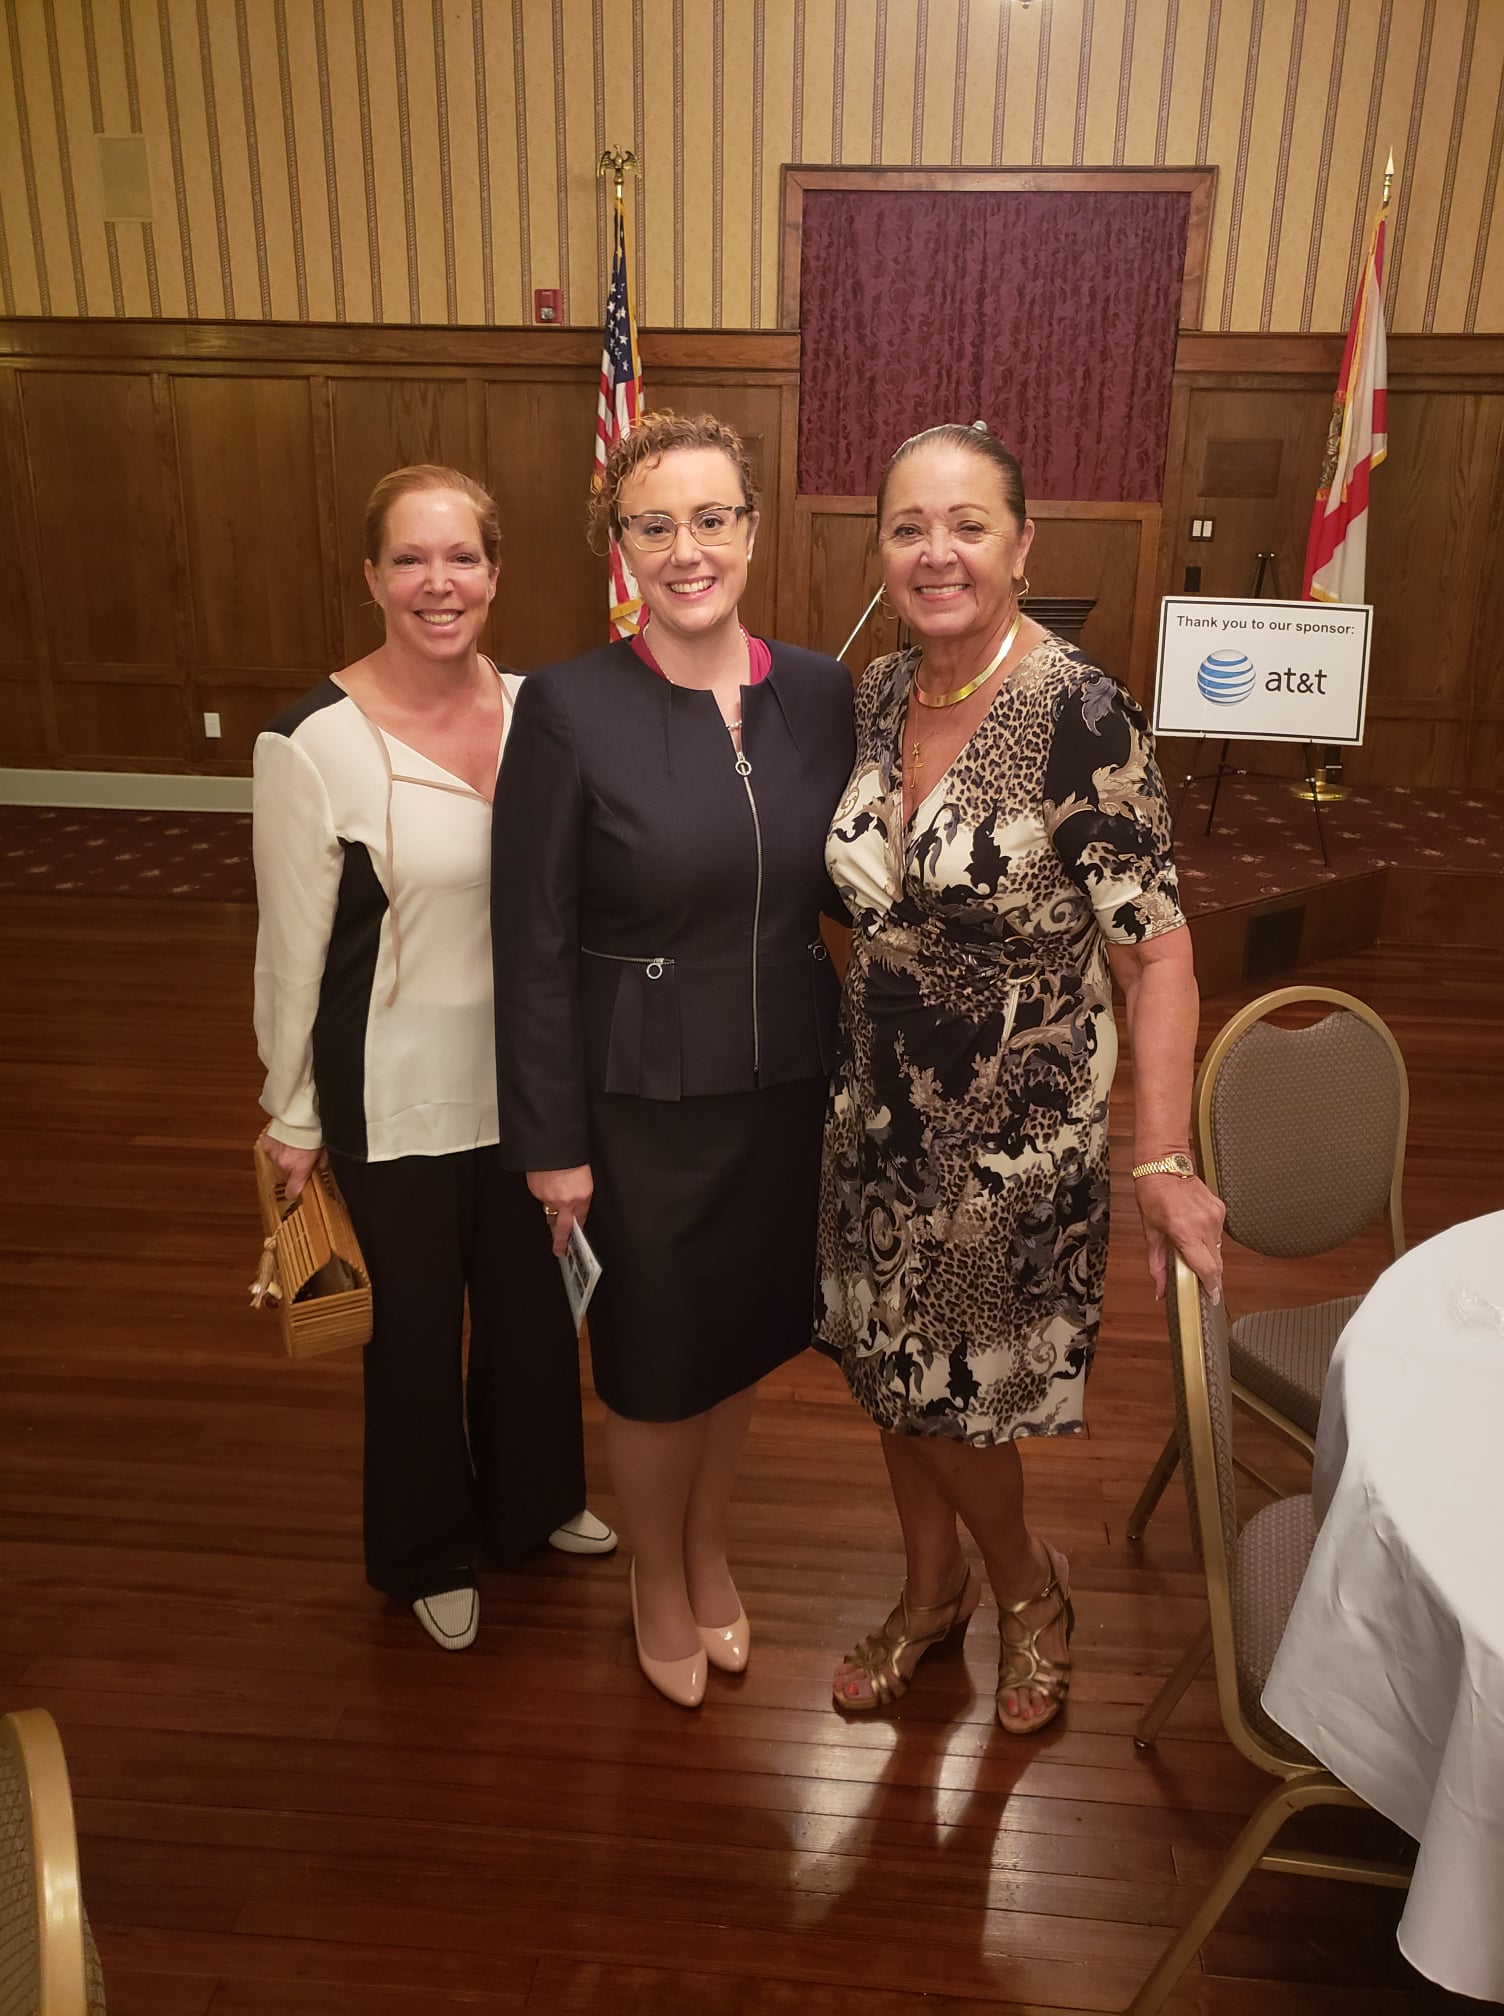 Tracey Zudans, Erin Grall and Carole Jean at a Legislative Luncheon hosted by the Indian River County Chamber of Commerce